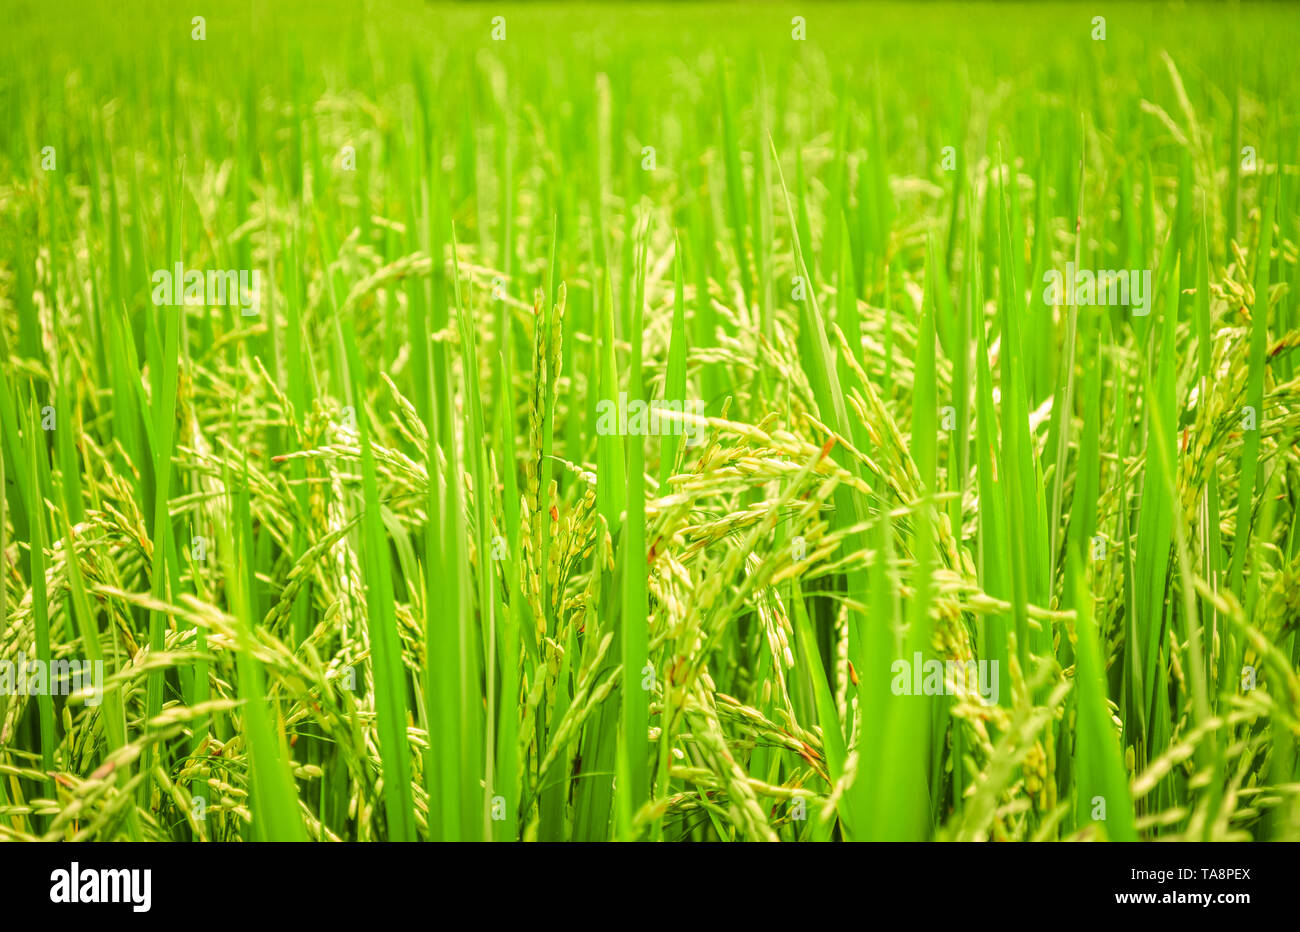 Rice field background - green paddy rice on tree in agriculture asia Stock Photo